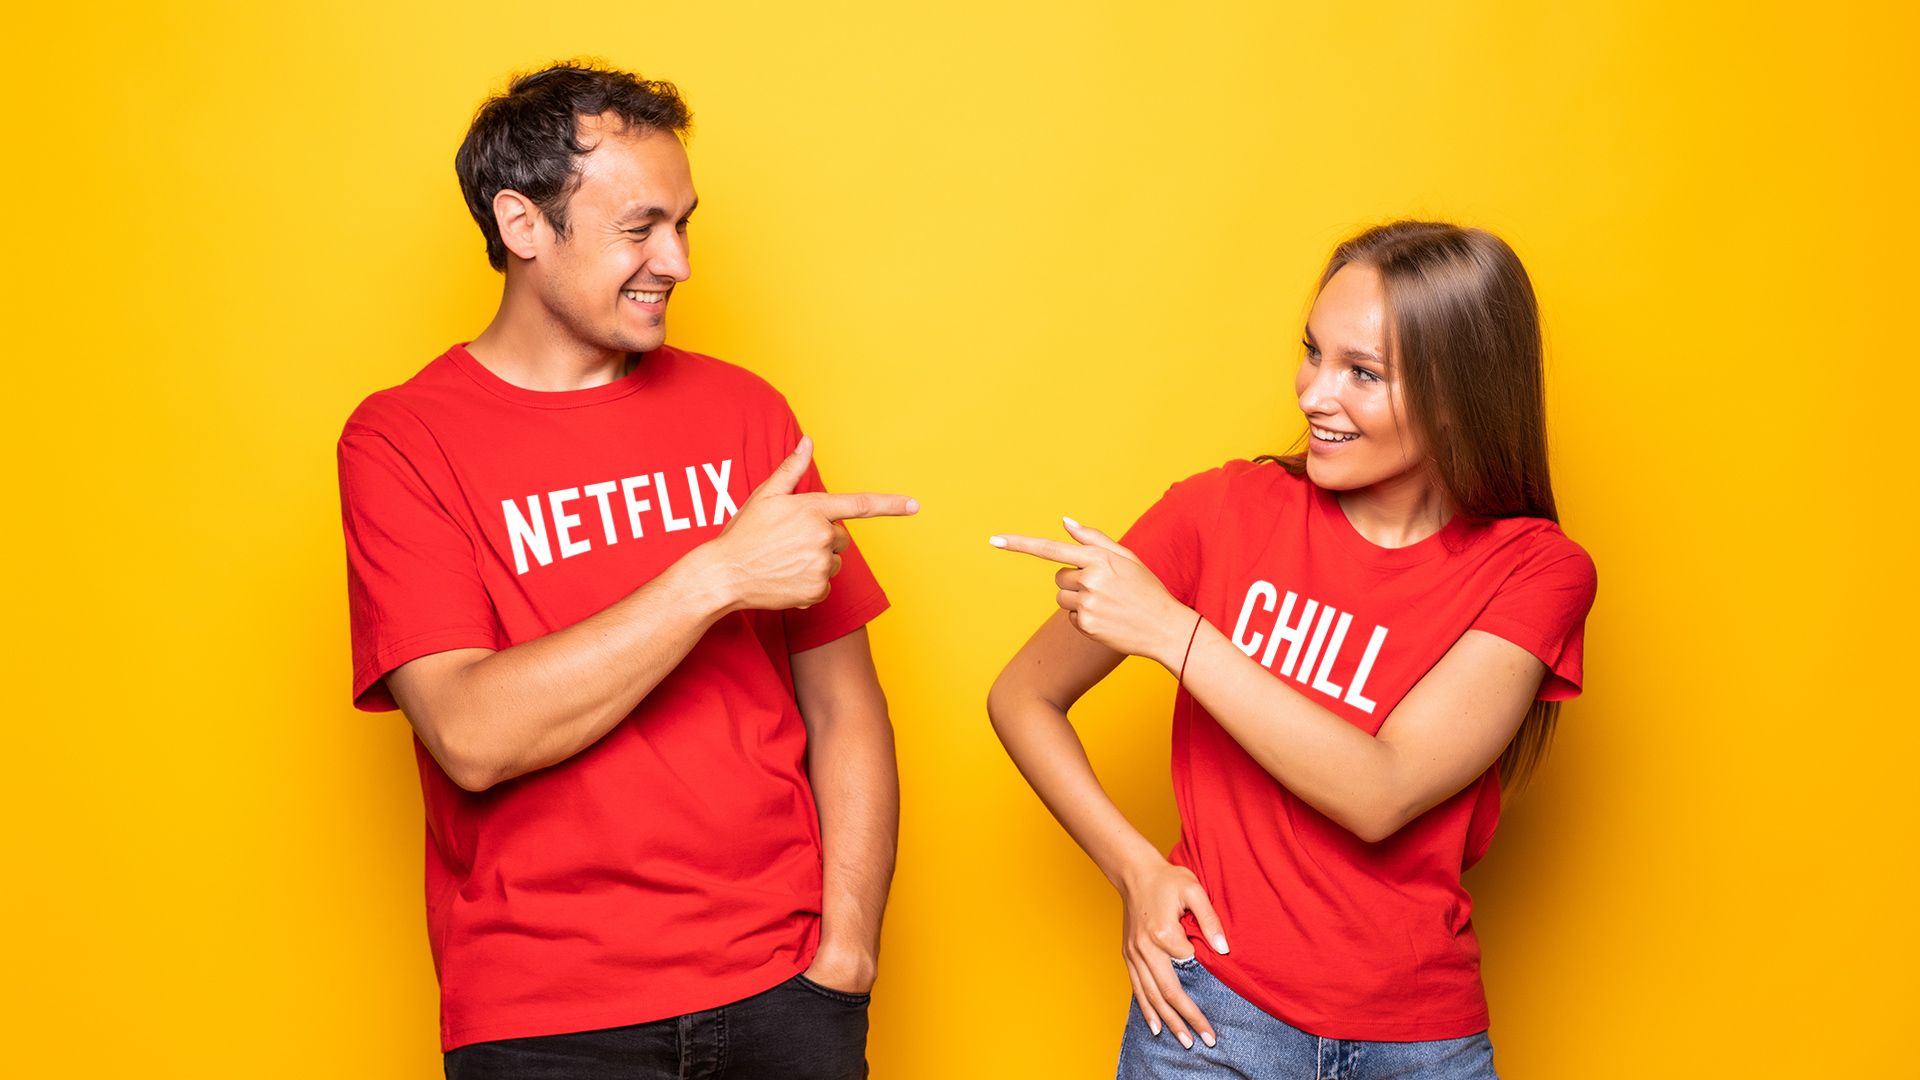 Woman and man red shirt pointing finger guns at each other. The man's shirt reads 'Netflix' and the woman's reads 'Chill'.